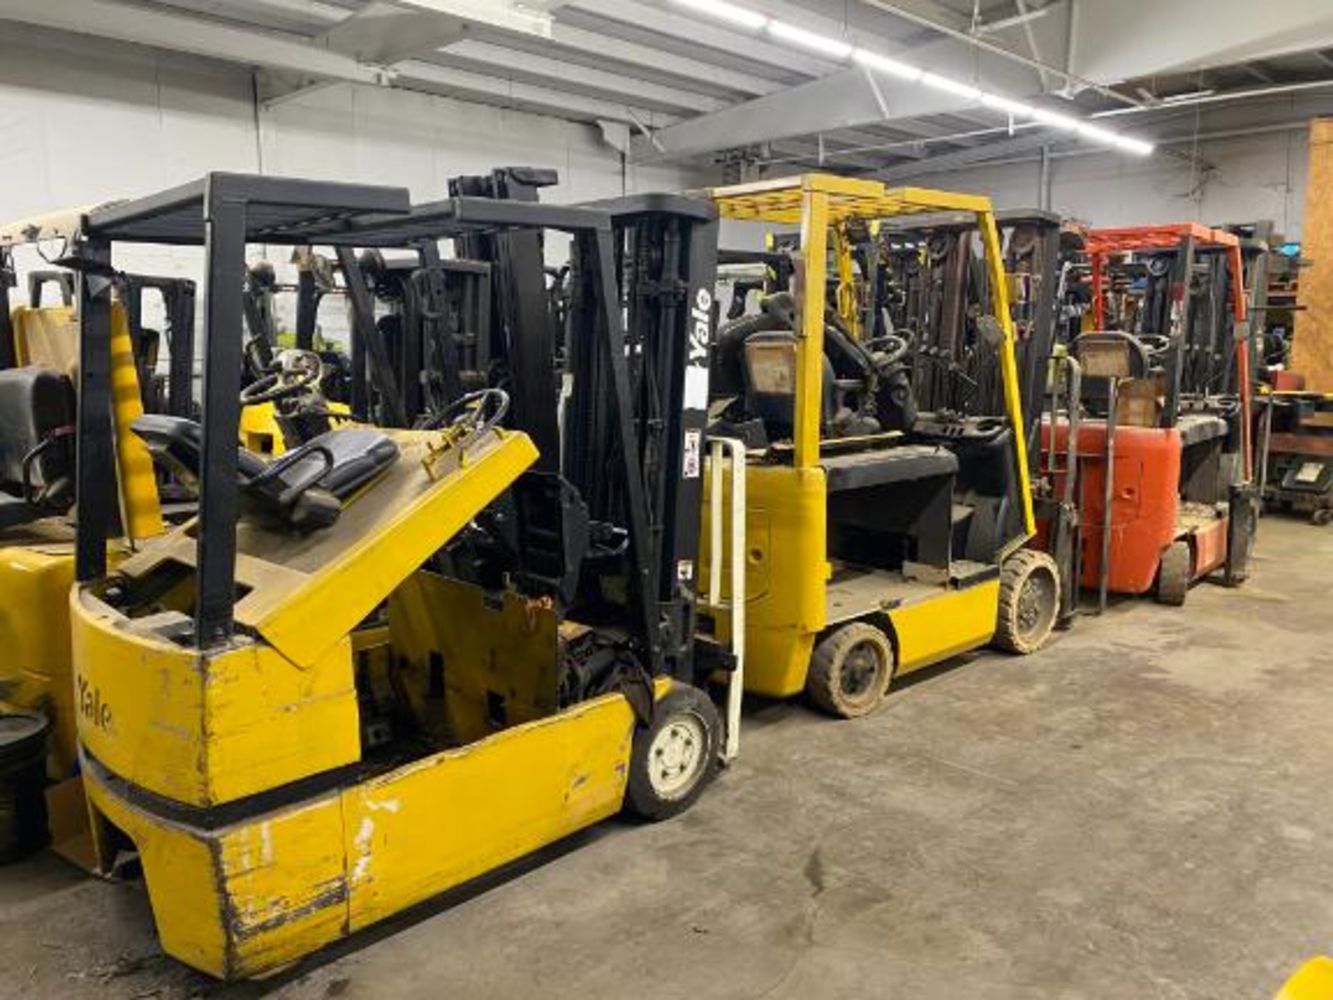 Certified Lift Solutions - Forklifts, Forklift Parts, Forklift Attachments